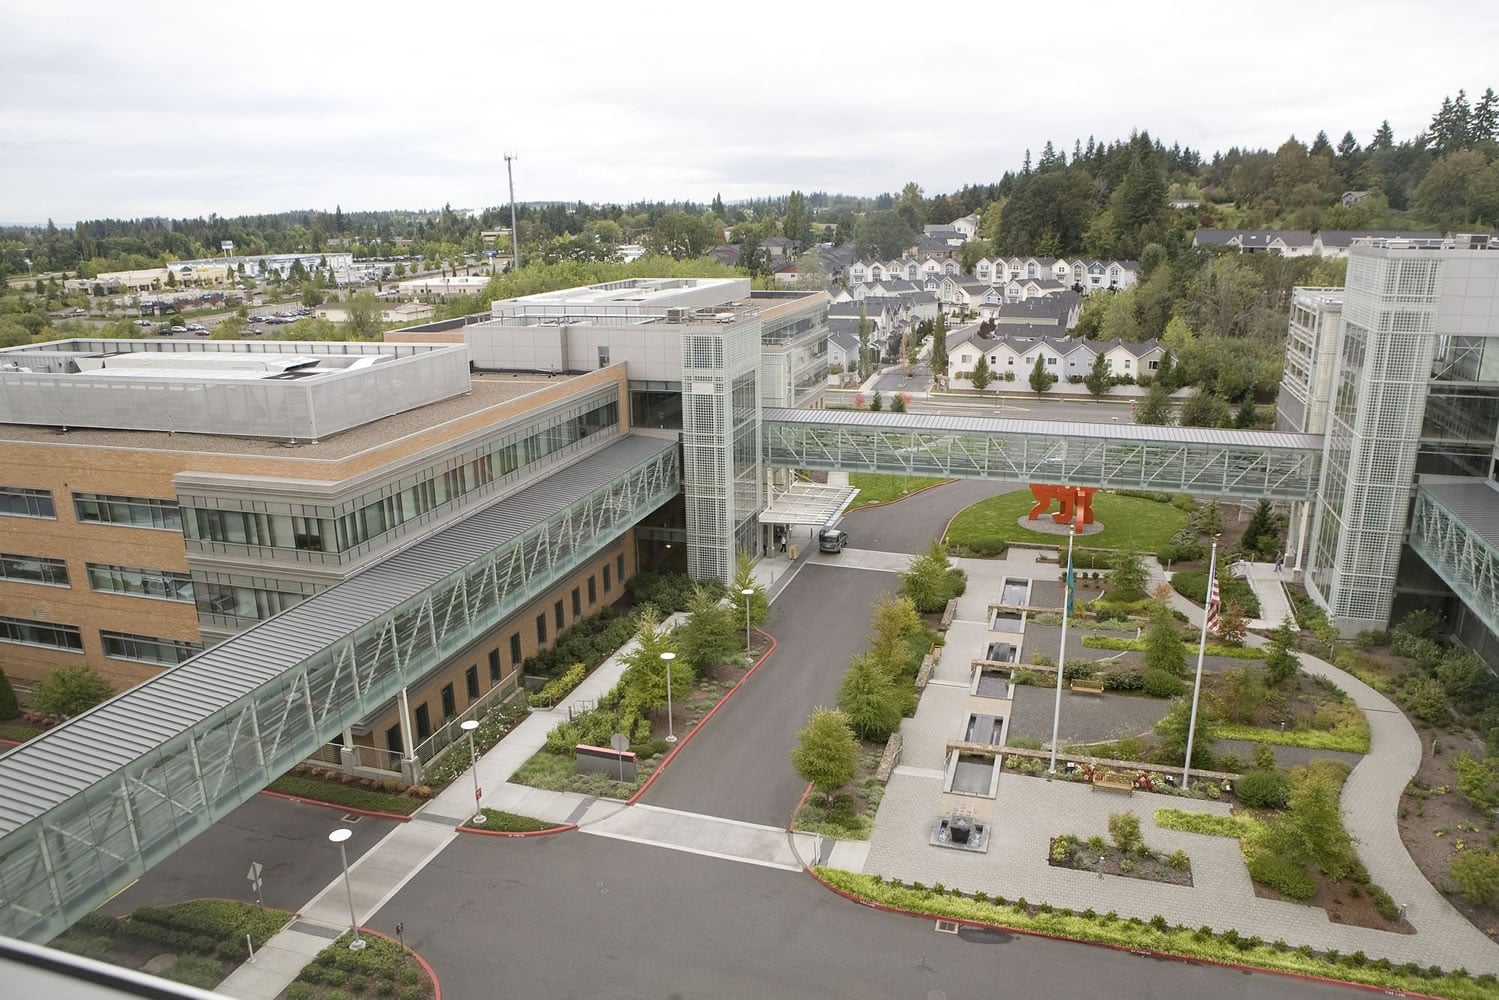 Legacy Health System, which includes the Legacy Salmon Creek Medical Center, expects to lay off up to 400 workers in Oregon and Southwest Washington in early 2012.